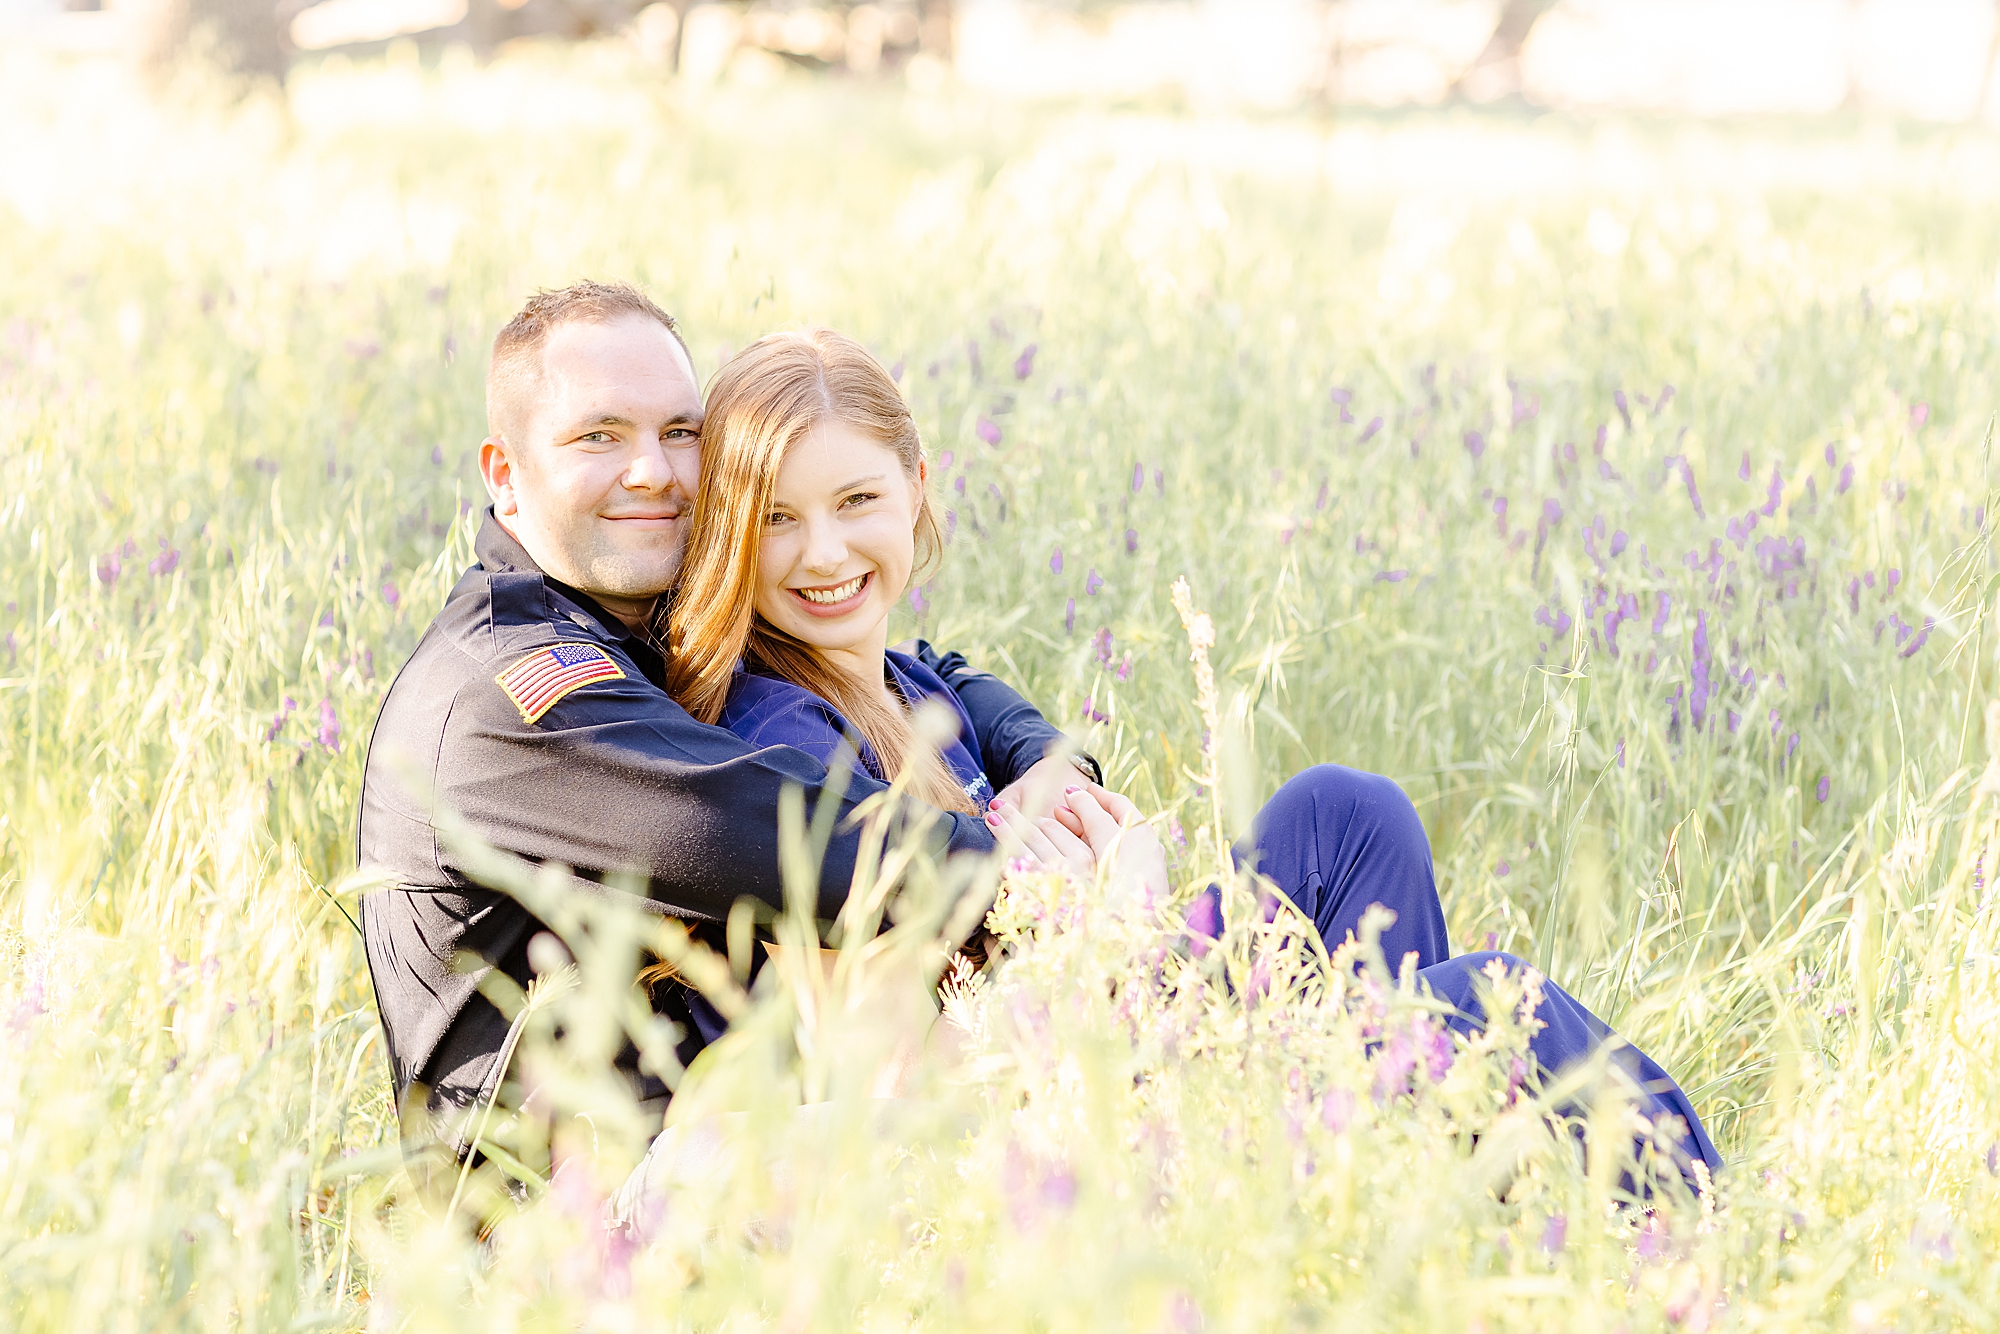 Nurse and Firefighter Engagement Session